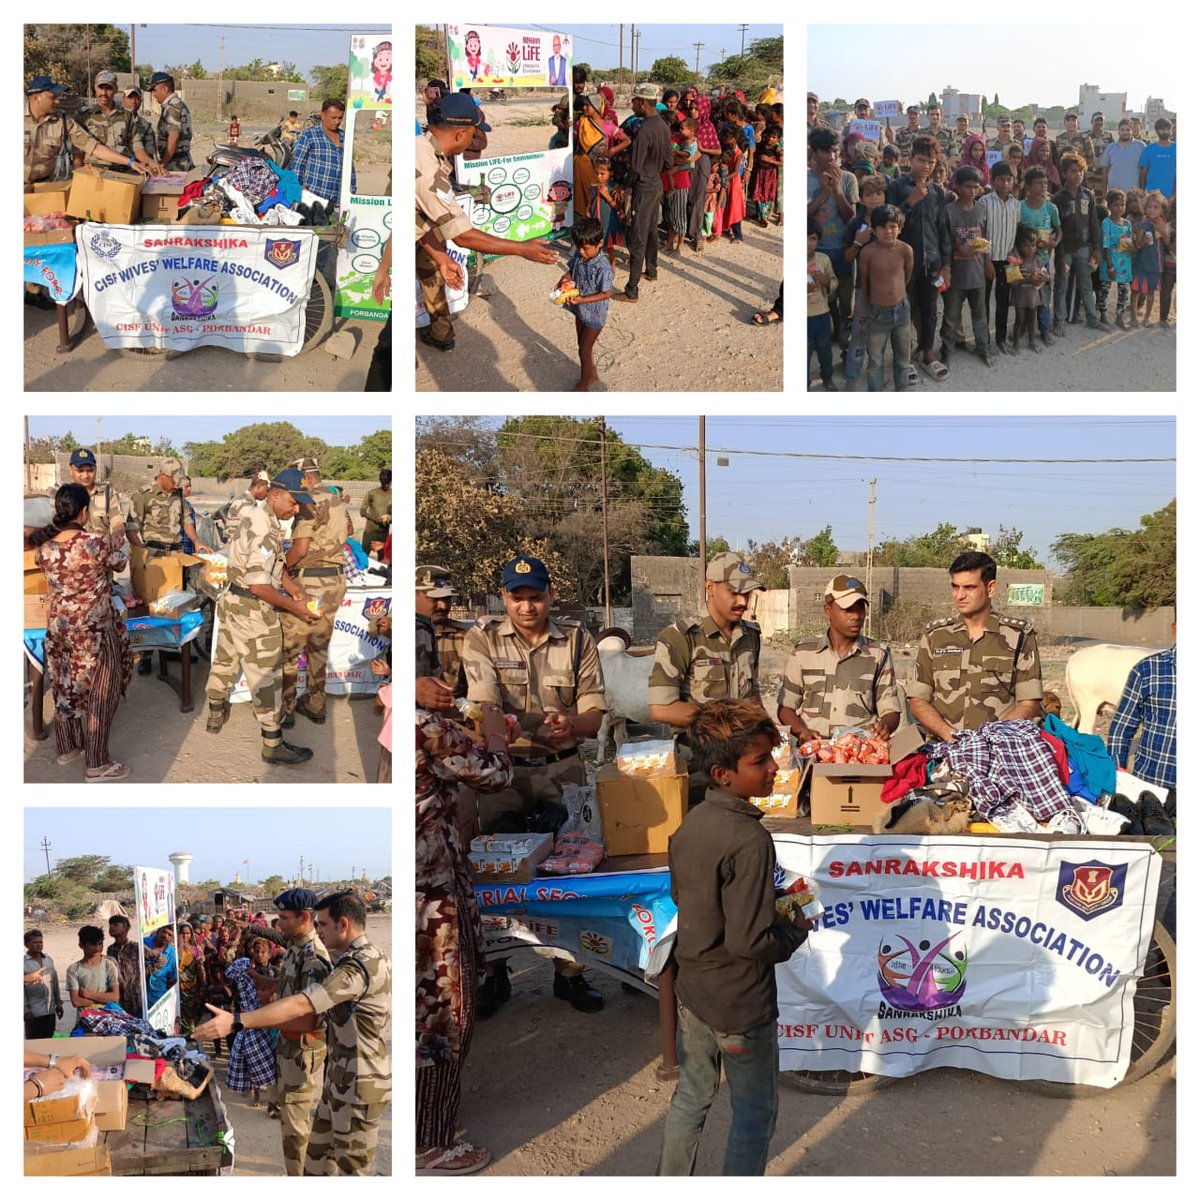 Giving is the greatest act of grace! #CISF personnel of ASG Porbandar distributed clothes and eatables among the needy people of nearby area under the aegis of “Sanrakshika'. #PROTECTIONandSECURITY with #HUMANITY. @HMOIndia